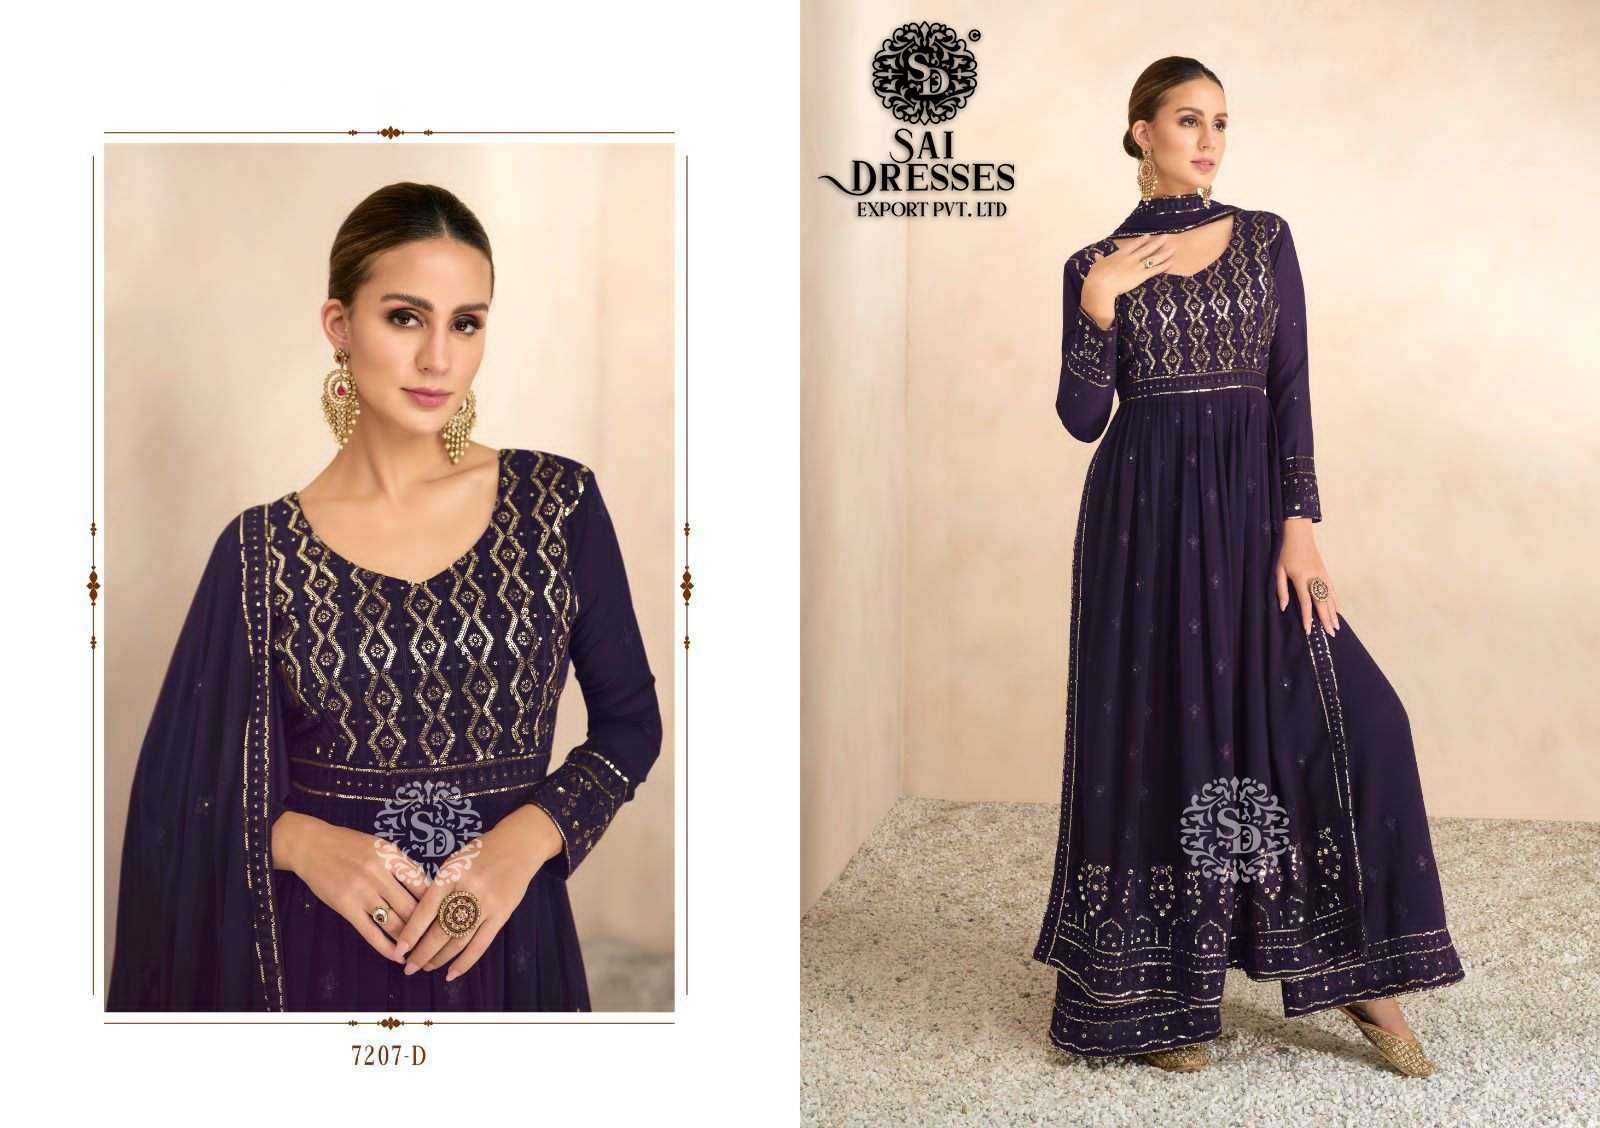 SAI DRESSES PRESENT NAYRA VOL 7 READYMADE PARTY WEAR NAYRA CUT WITH PLAZZO STYLE DESIGNER 3 PIECE SUITS IN WHOLESALE RATE IN SURAT